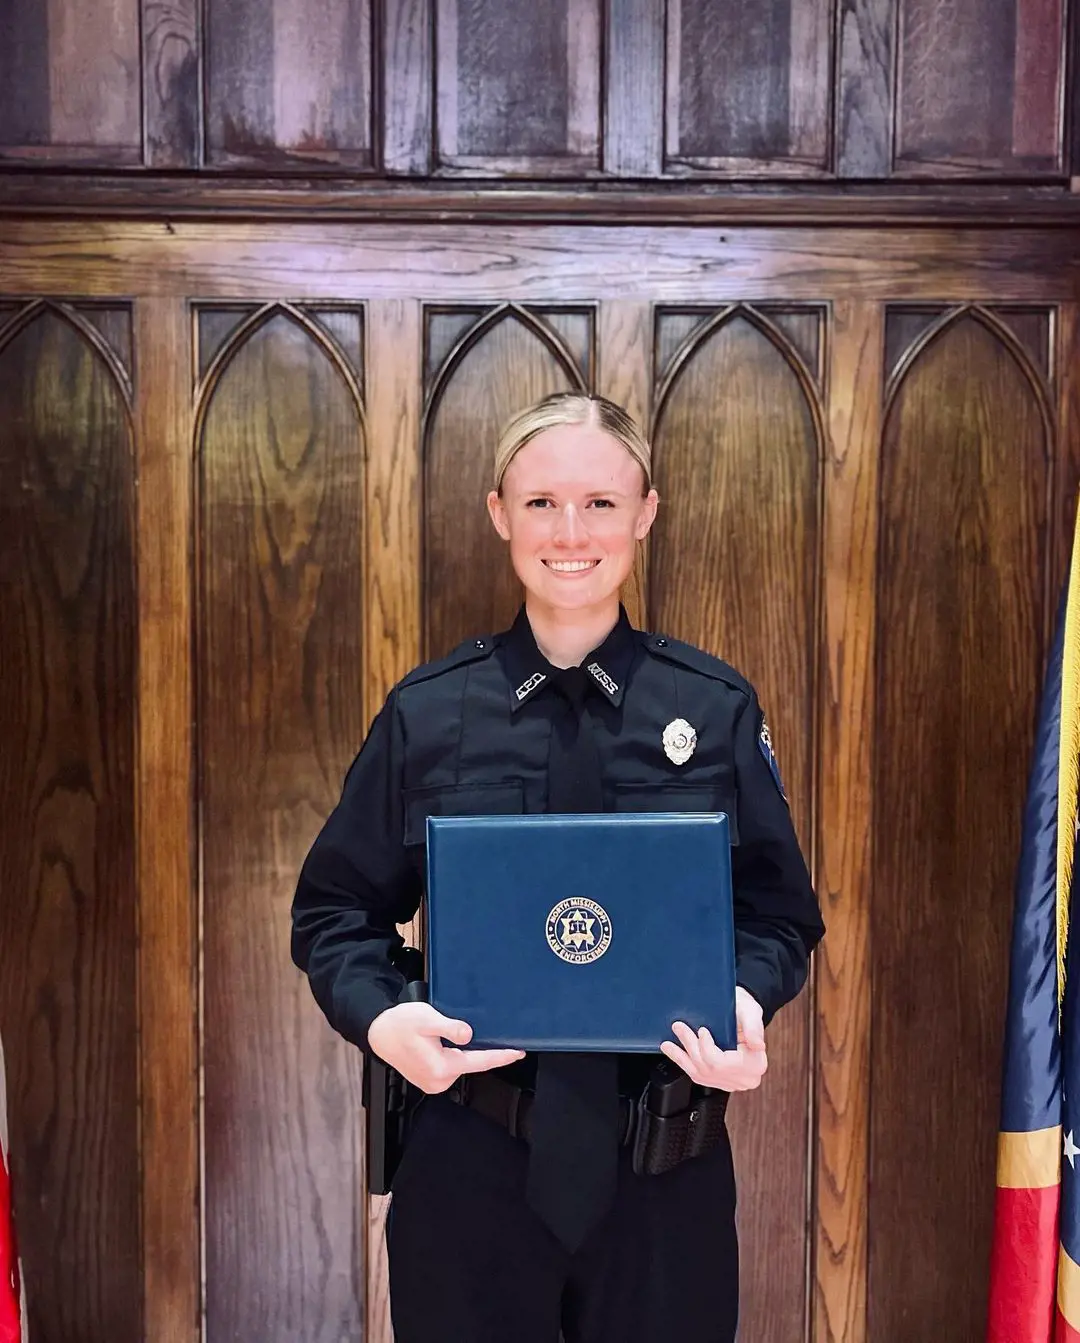 She joined the Amory Police Department as a patrol officer after NMLETC graduation in Tupelo, Mississippi